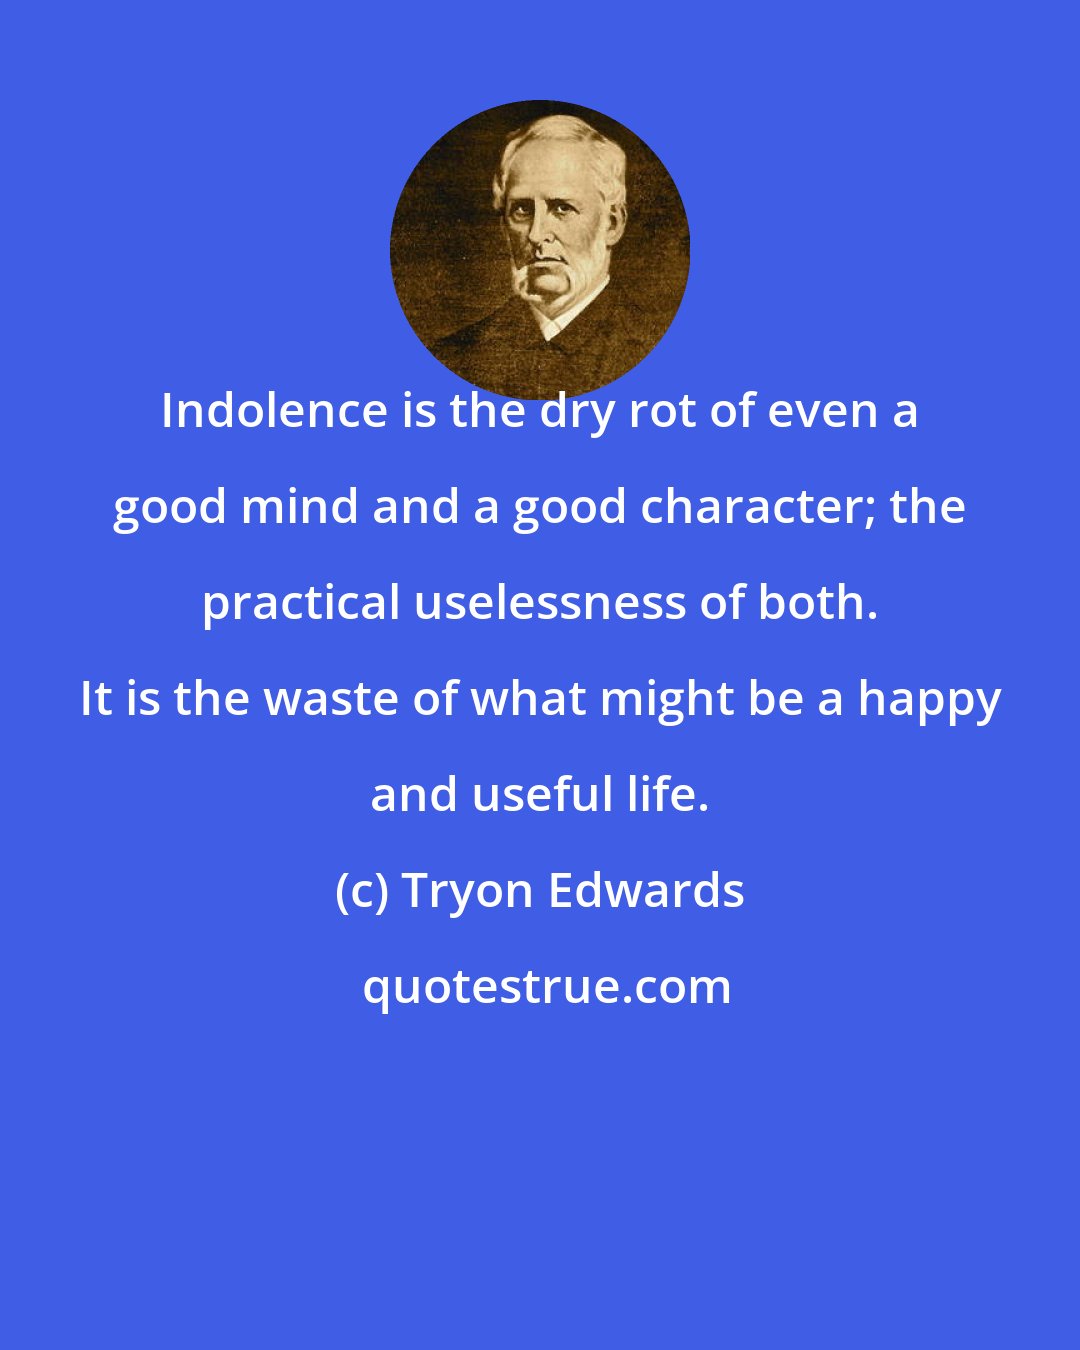 Tryon Edwards: Indolence is the dry rot of even a good mind and a good character; the practical uselessness of both. It is the waste of what might be a happy and useful life.